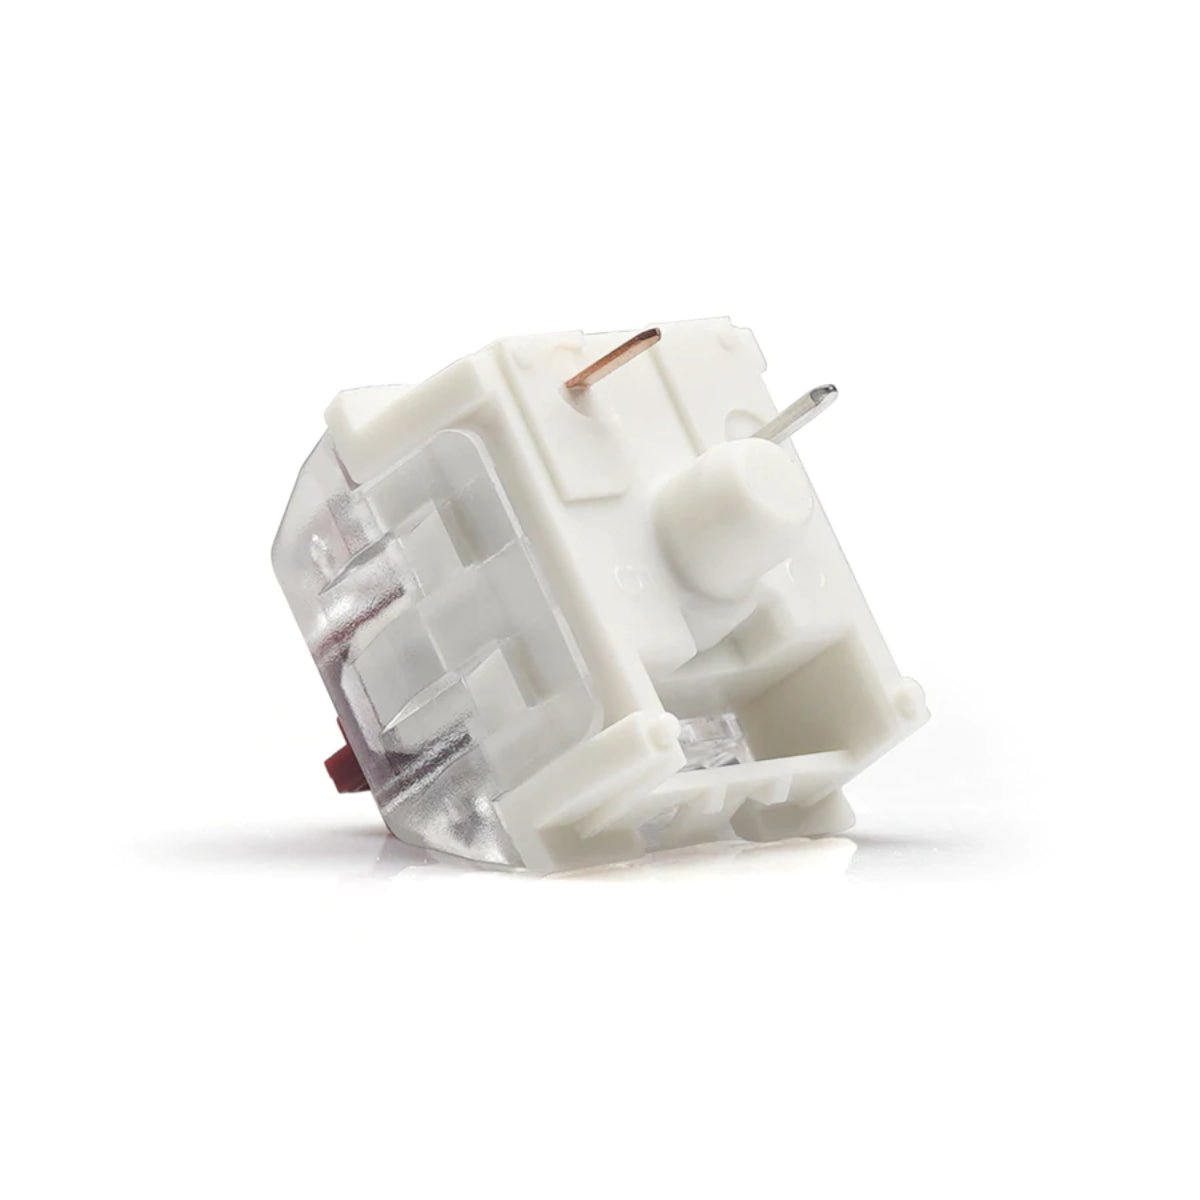 KBD Fans Kailh Speed Tactile Switches - Copper - Store 974 | ستور ٩٧٤